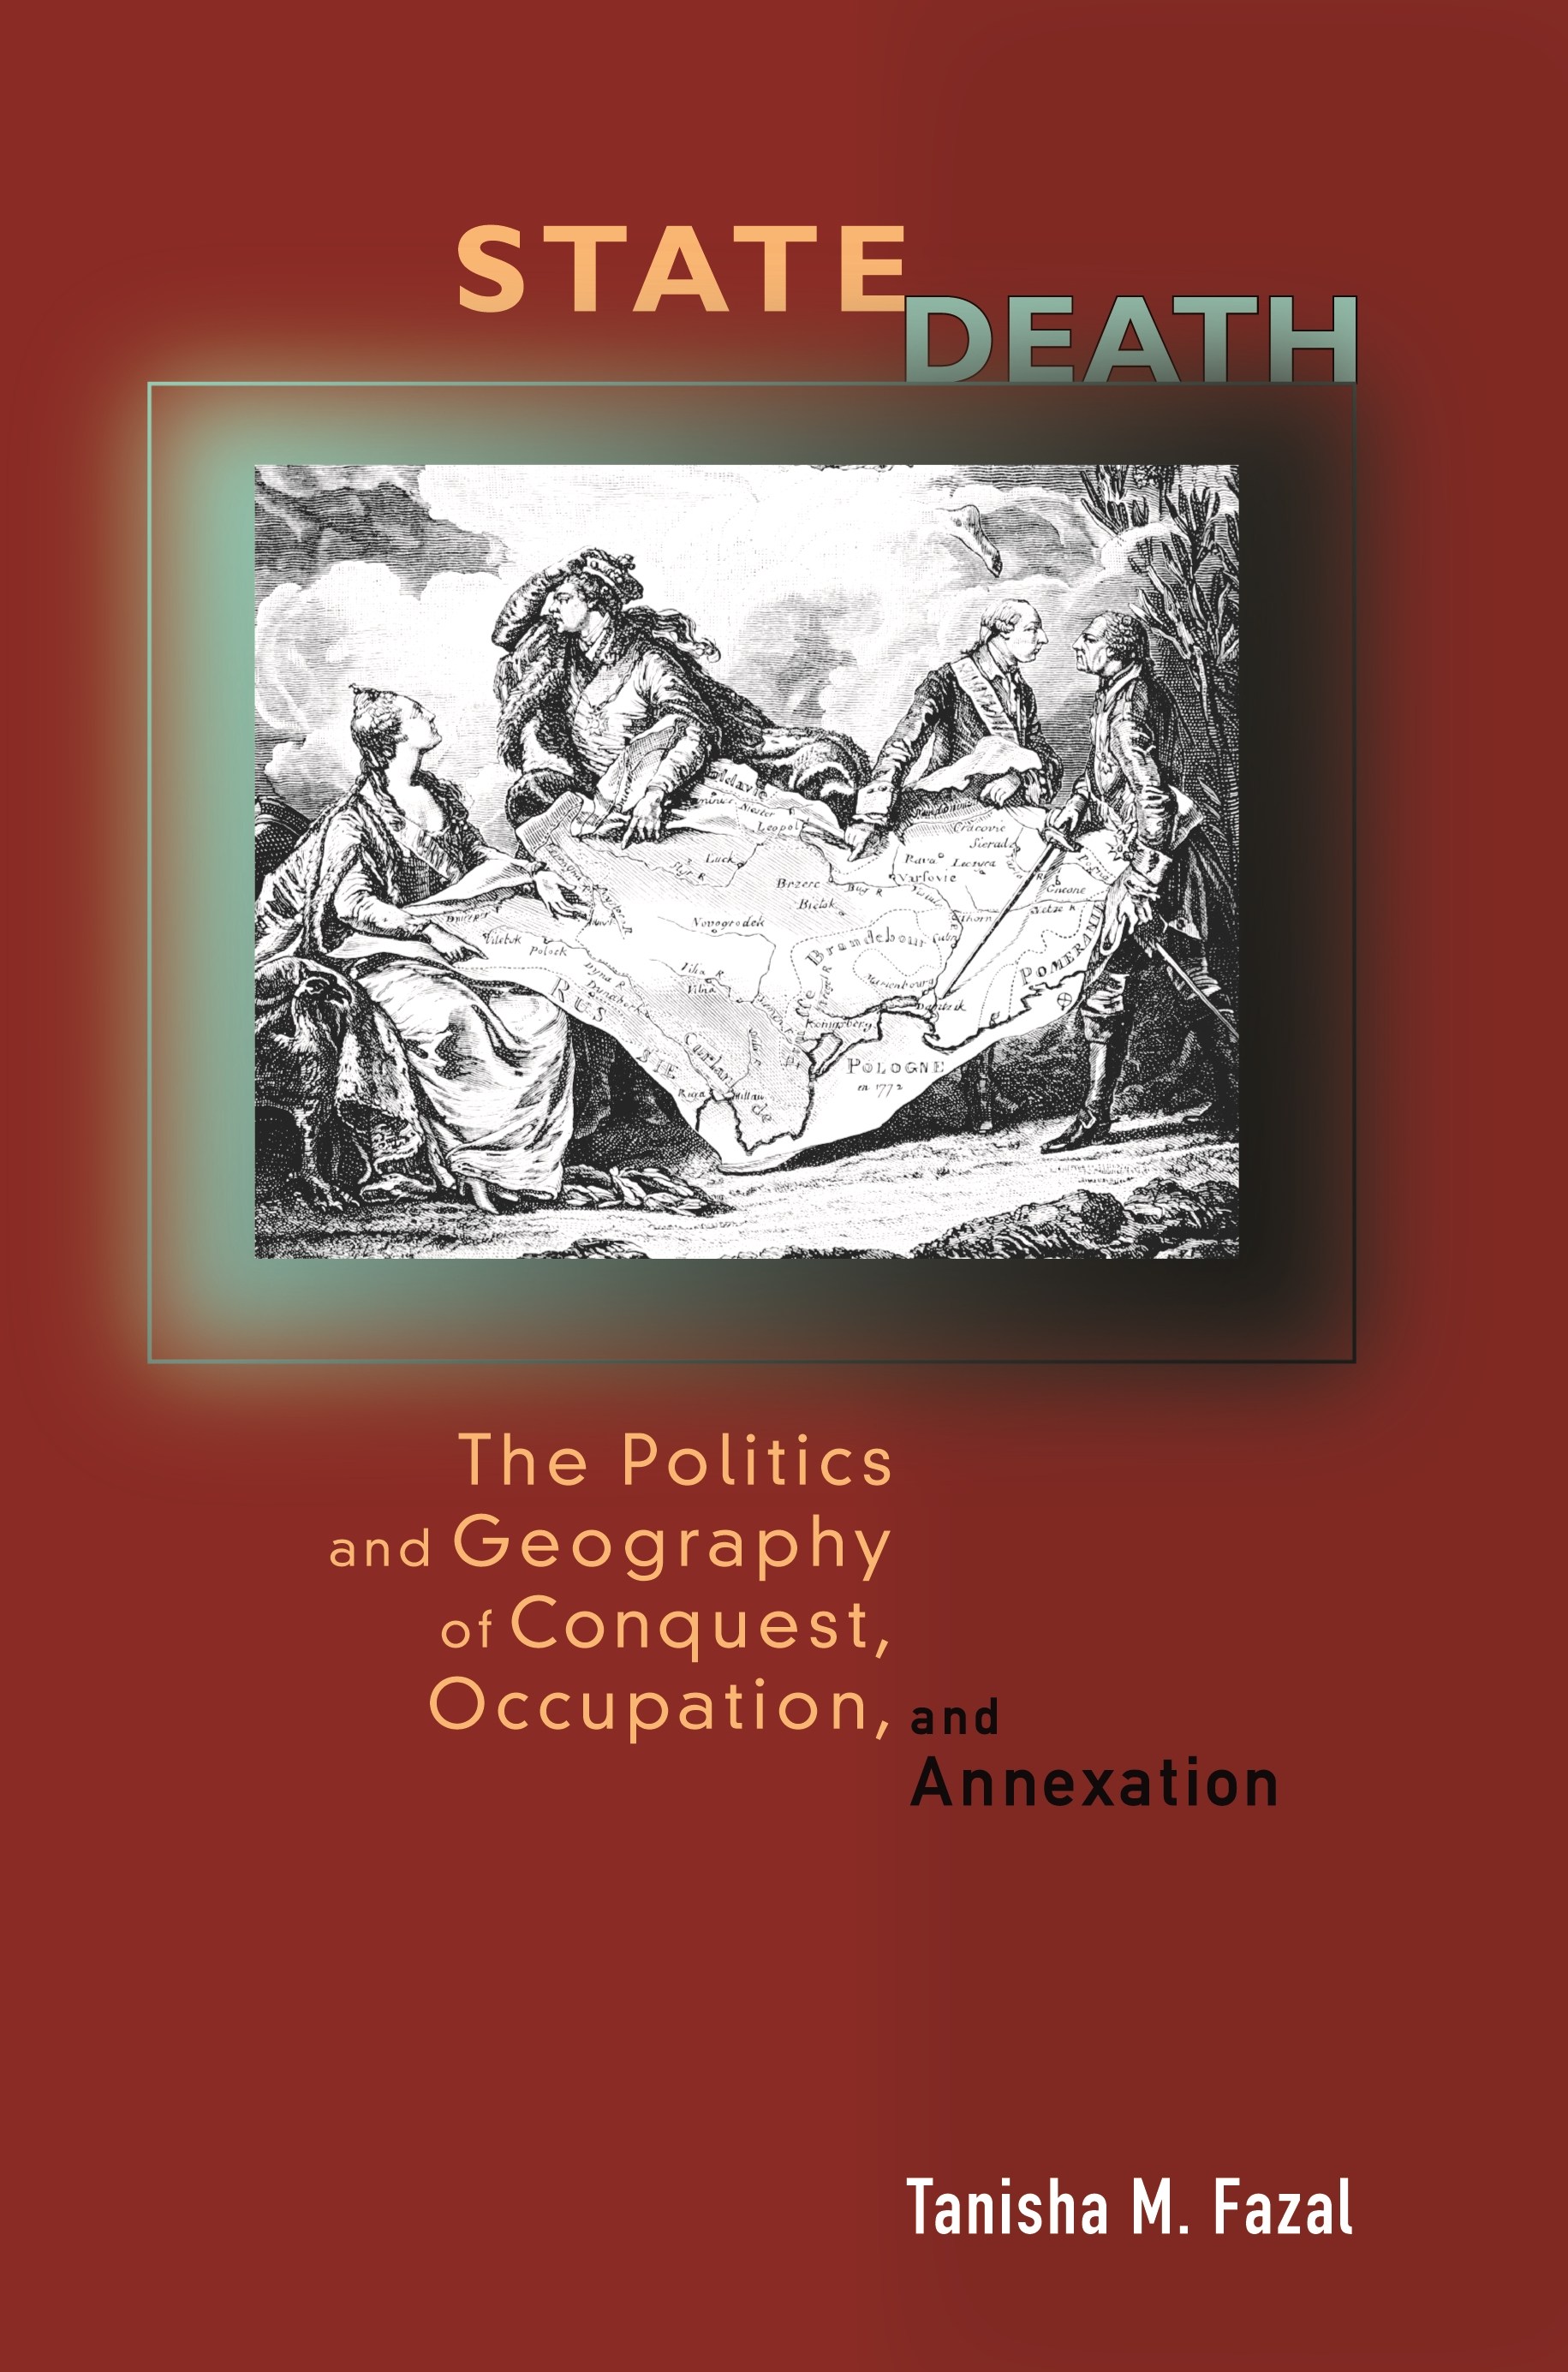 Does Conquest Pay?  Princeton University Press